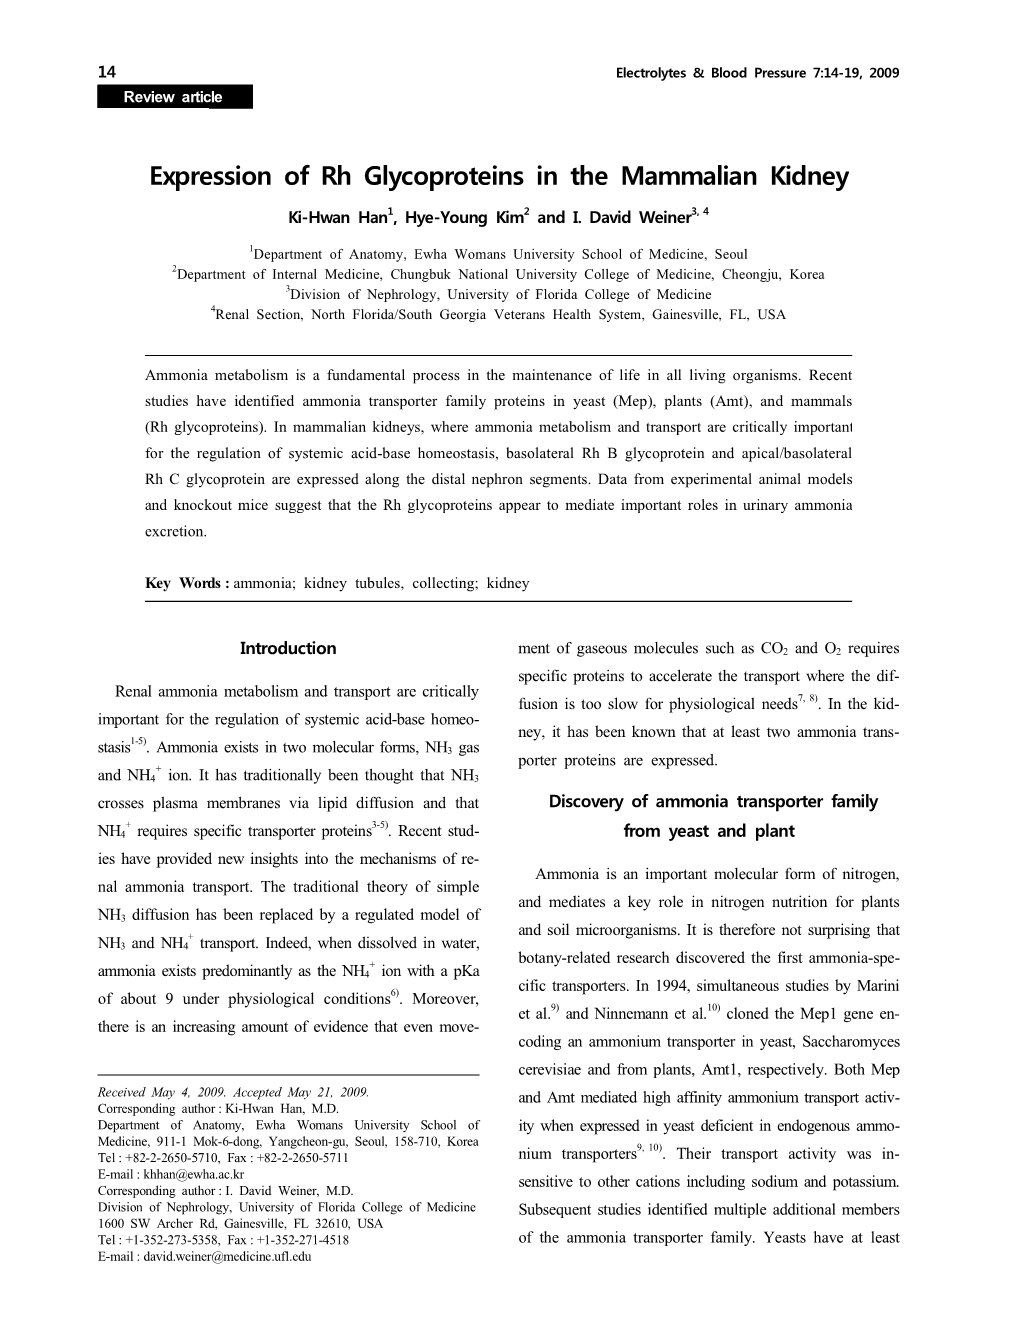 Expression of Rh Glycoproteins in the Mammalian Kidney